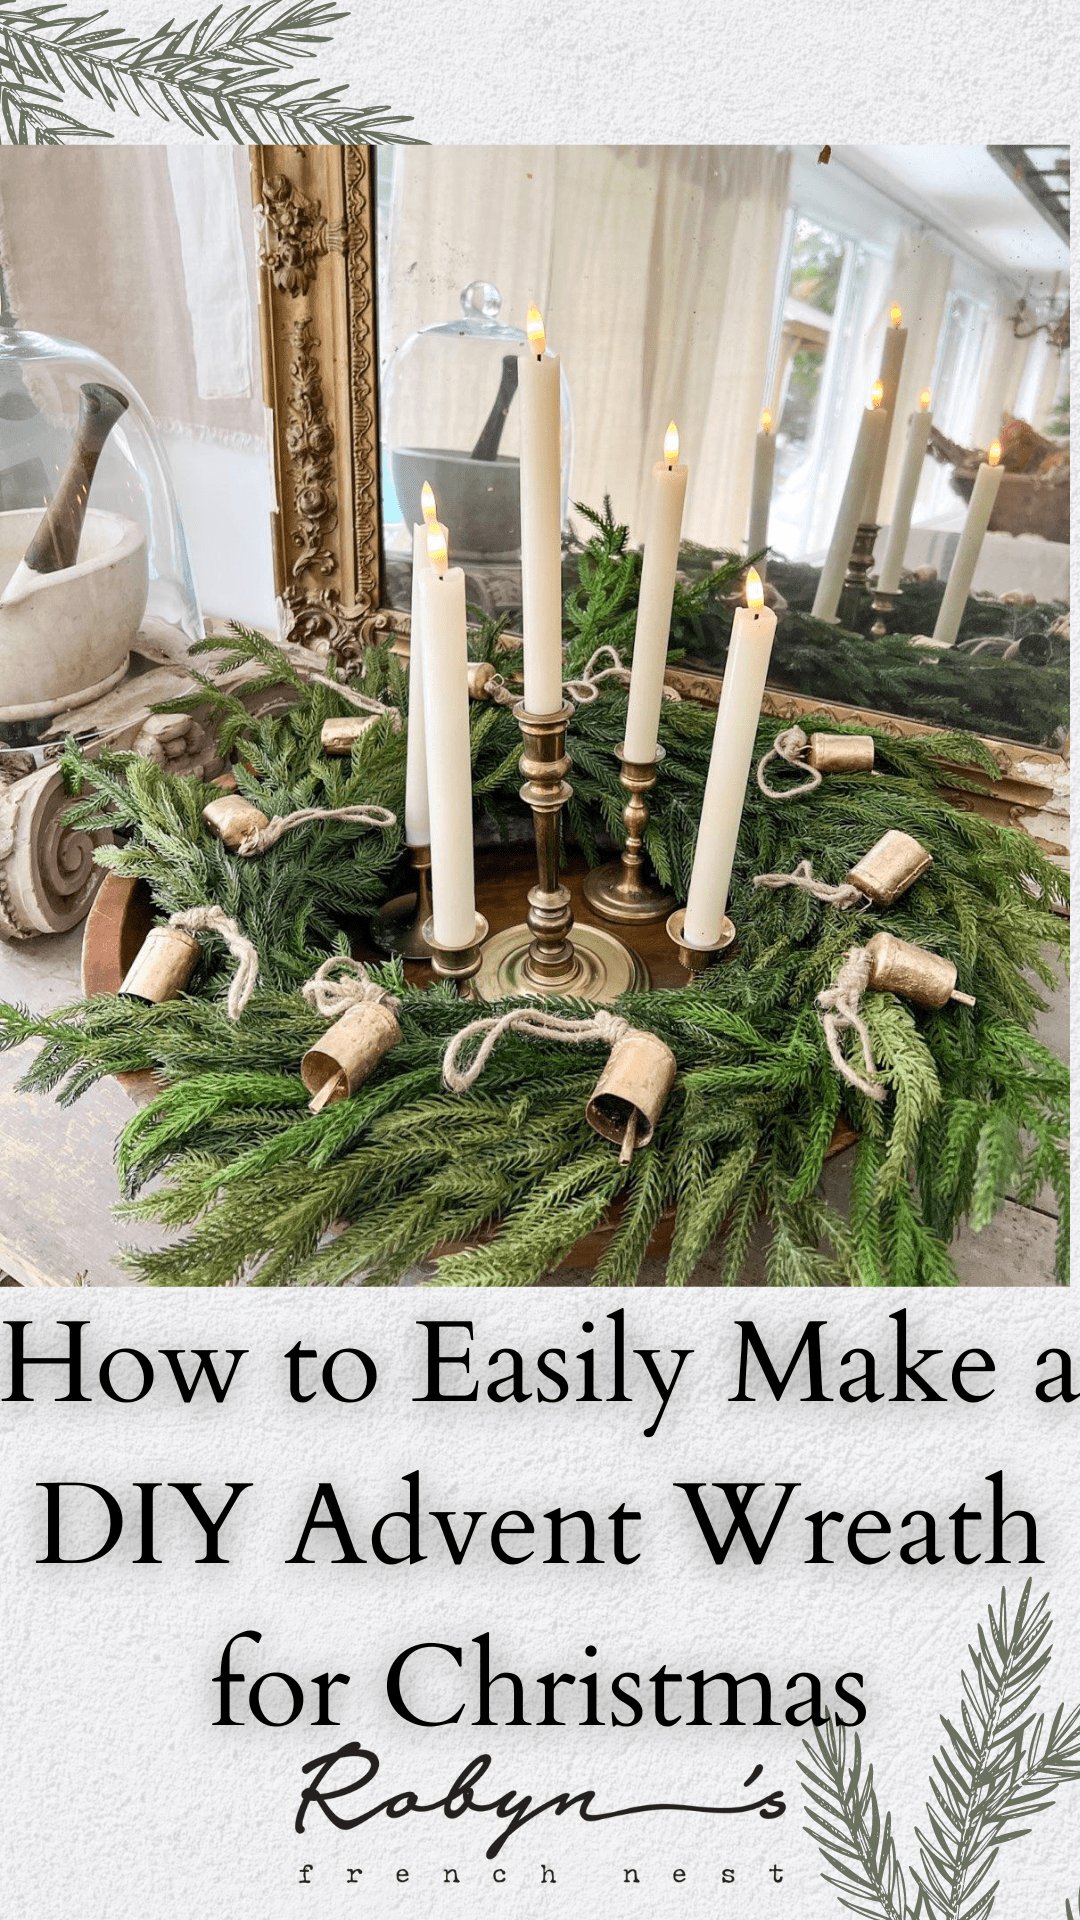 How to Easily Make a DIY Advent Wreath for Christmas